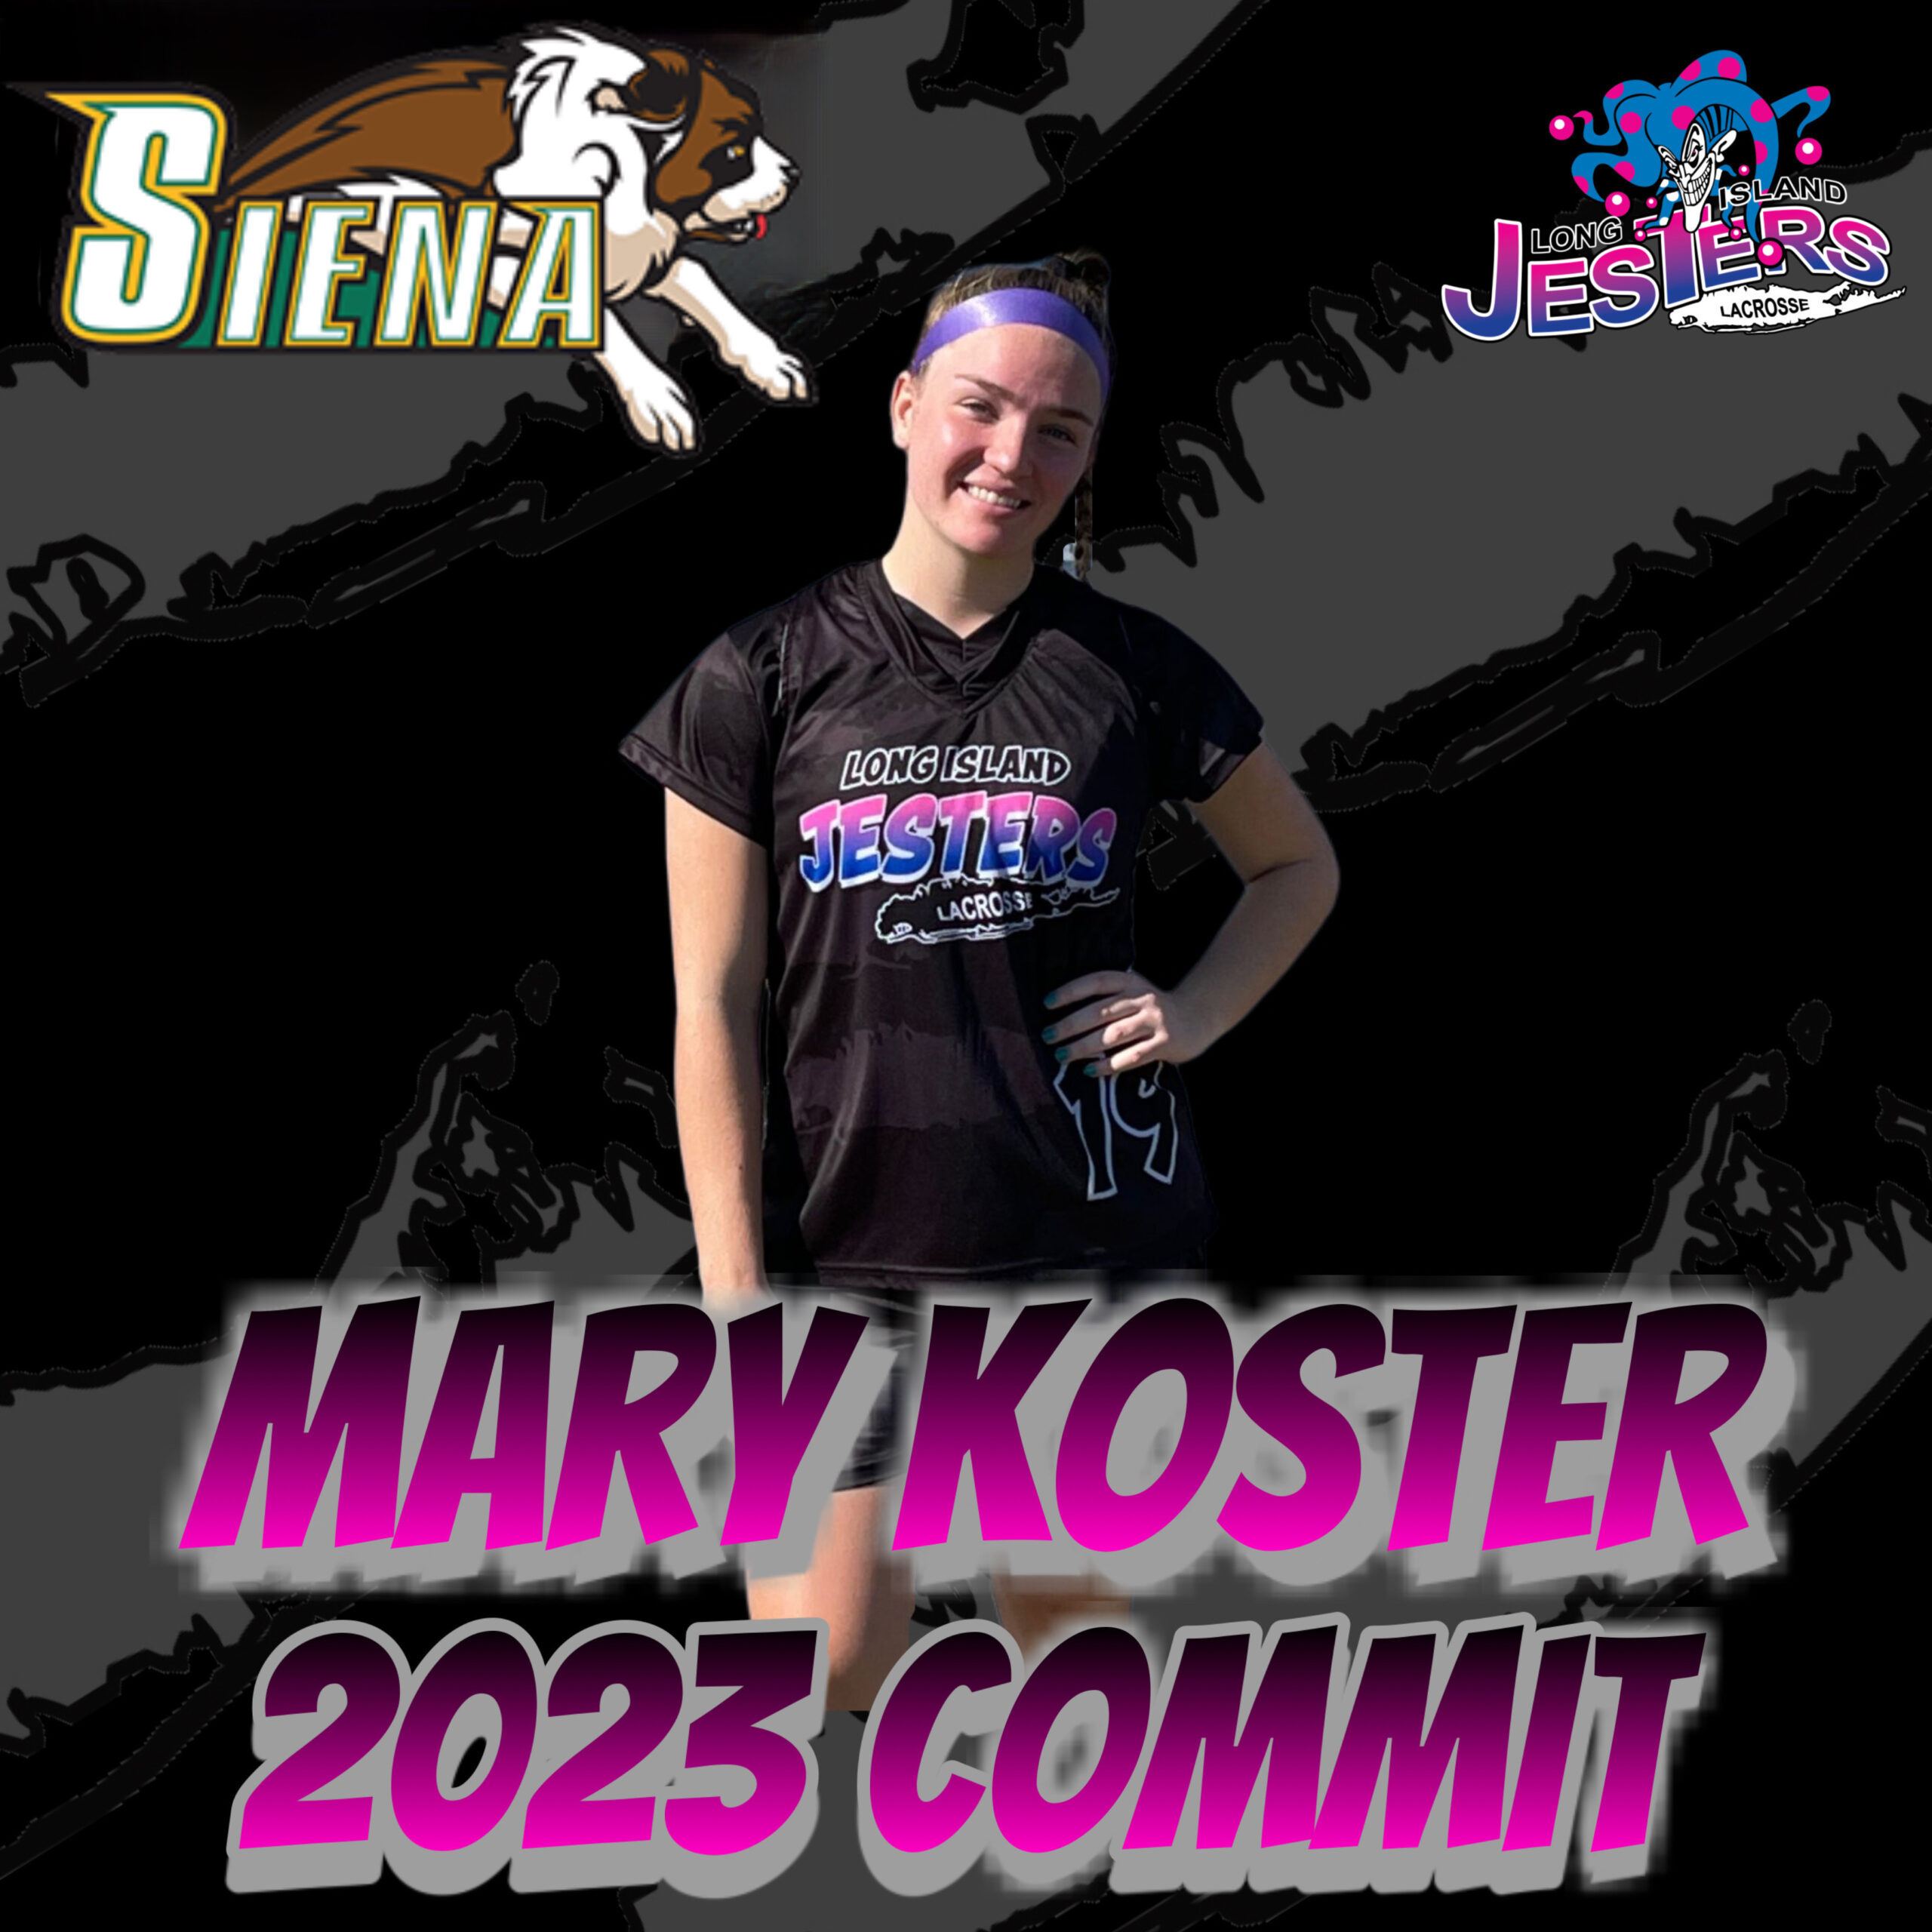 Koster commit 2